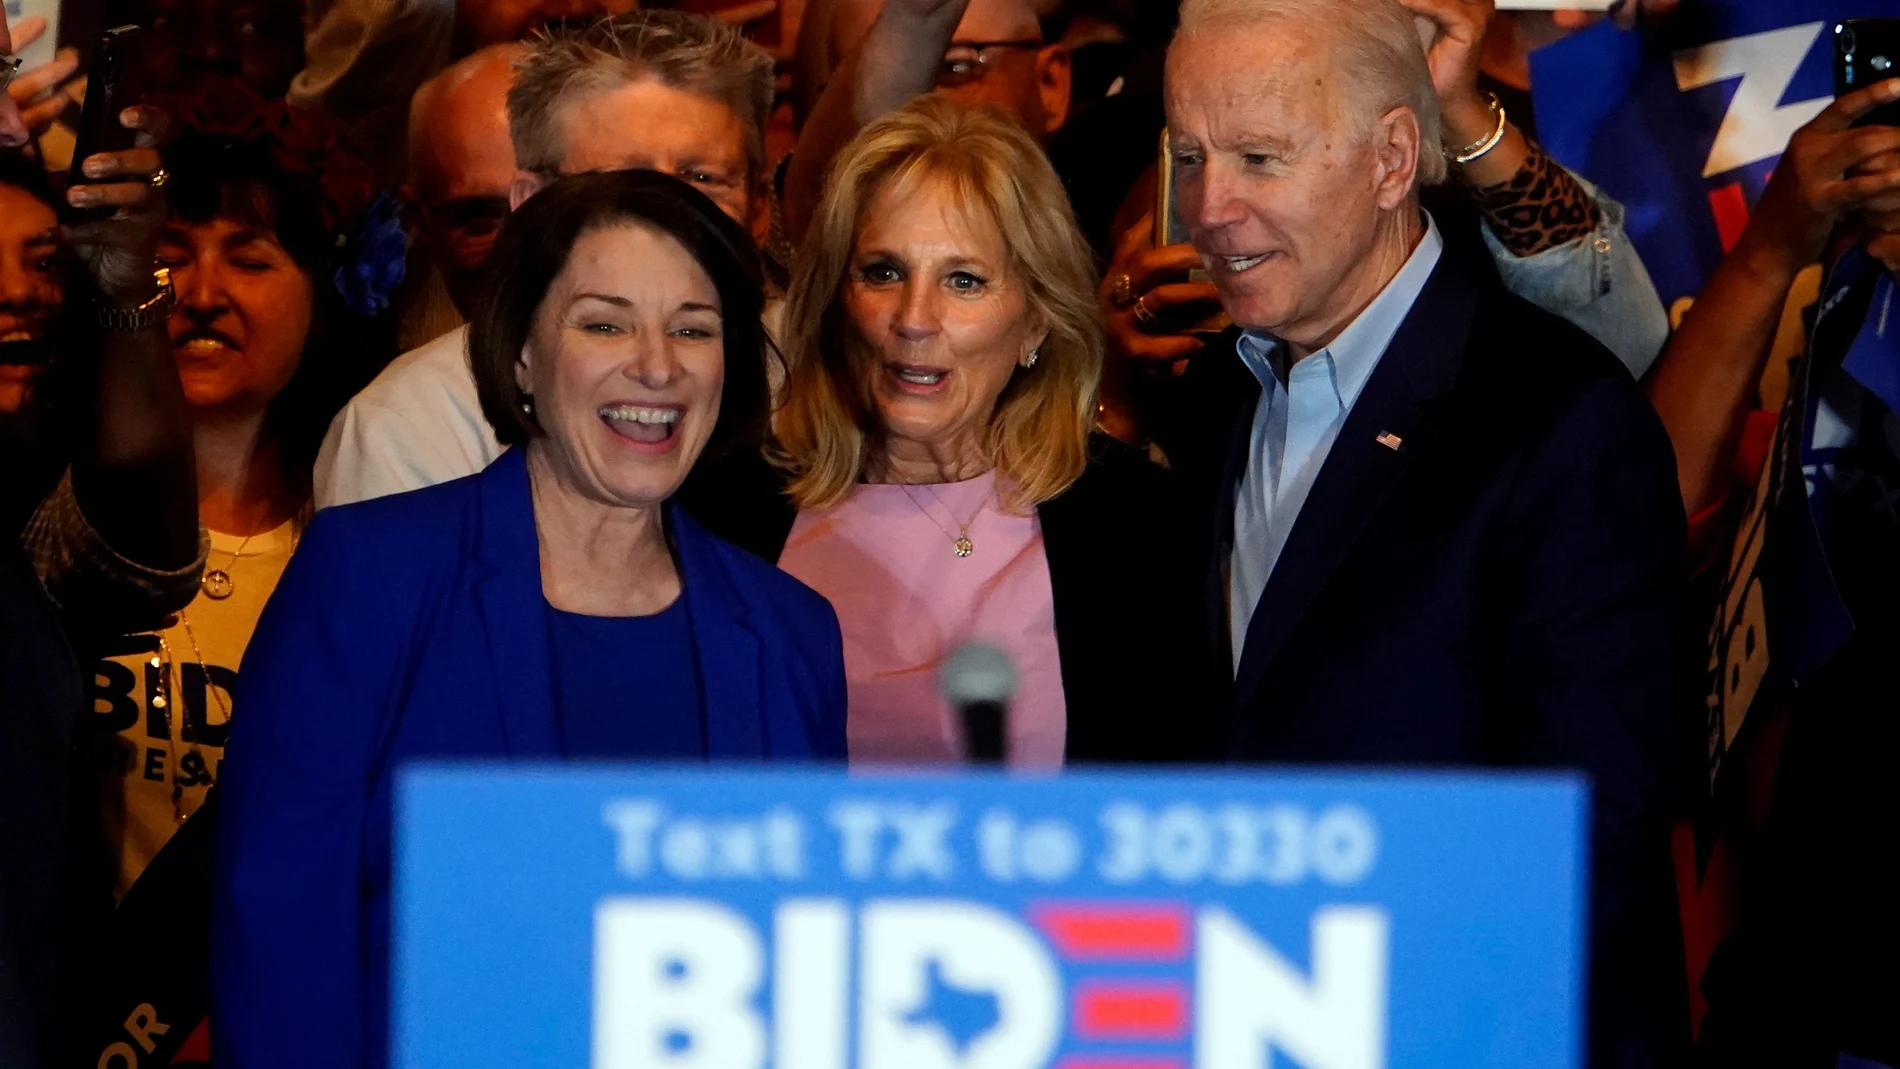 FILE PHOTO: Former Democratic 2020 U.S. presidential candidate Klobuchar endorses former U.S. Vice President Biden's campaign for U.S. president during a campaign event in Dallas,